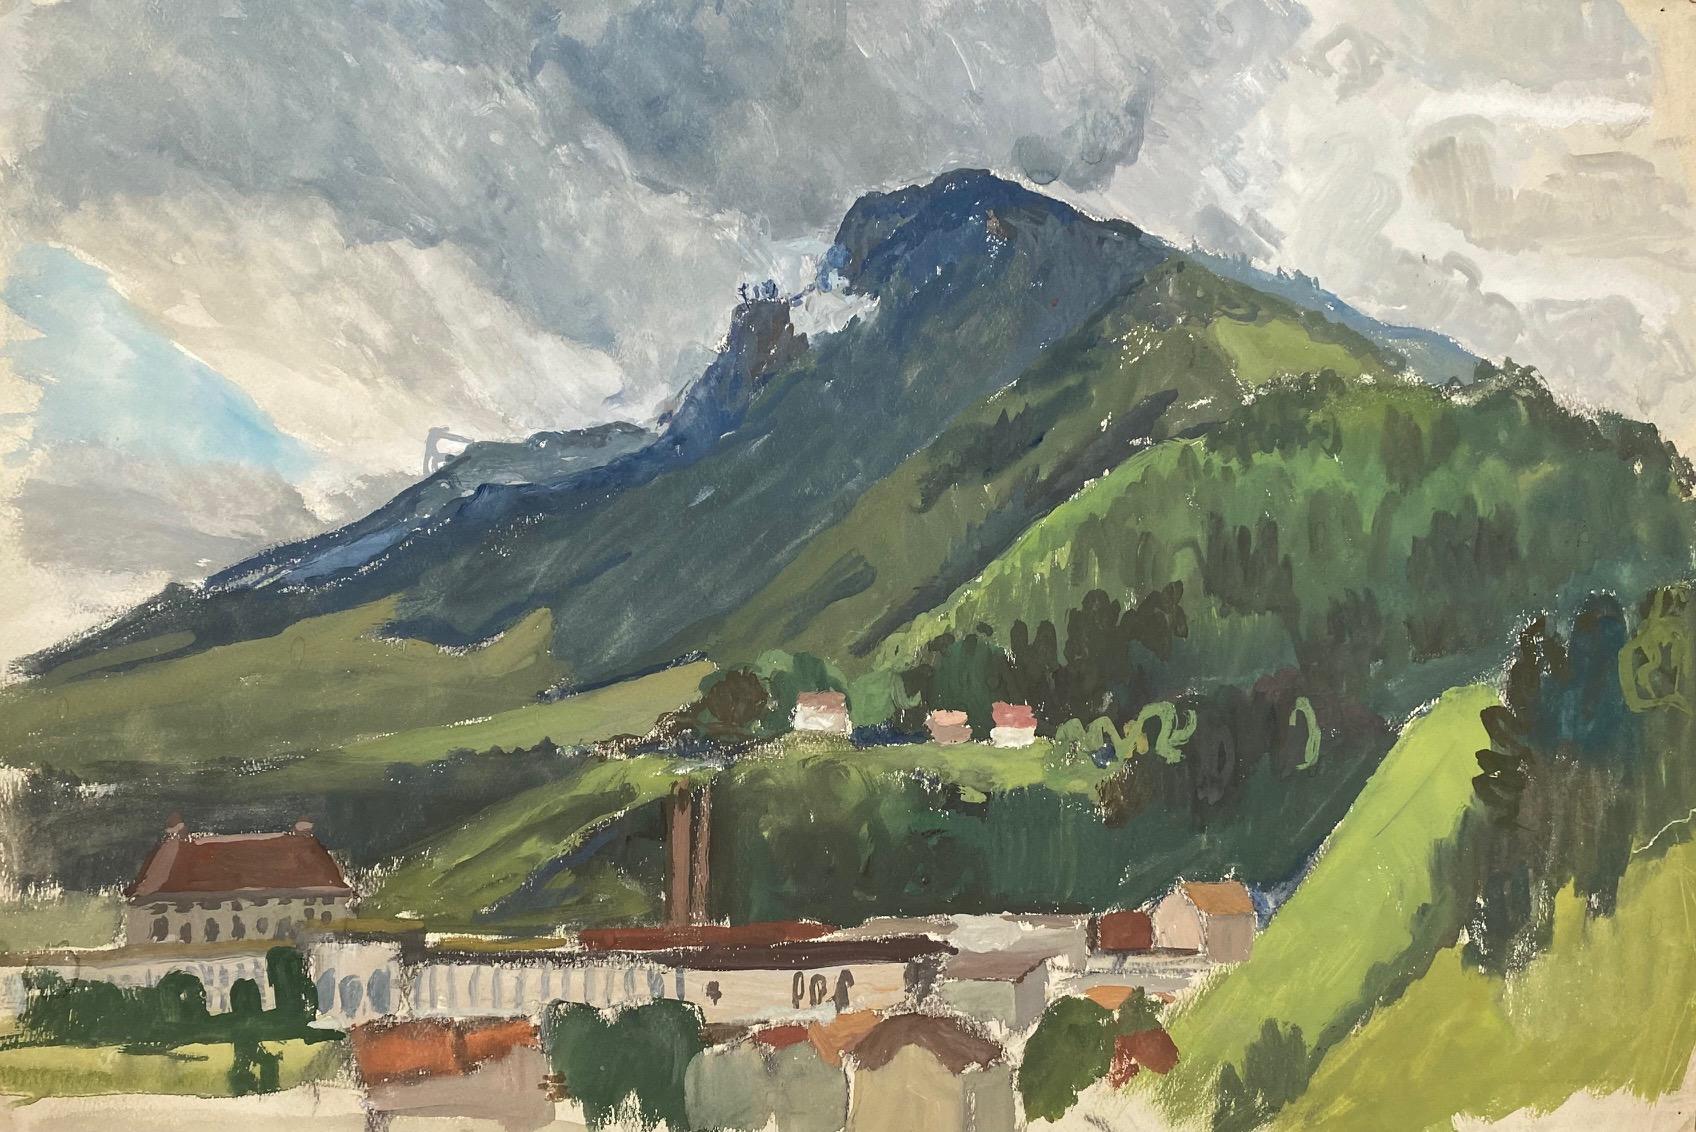 The valley by Charles Goetz - Watercolor 36x54 cm